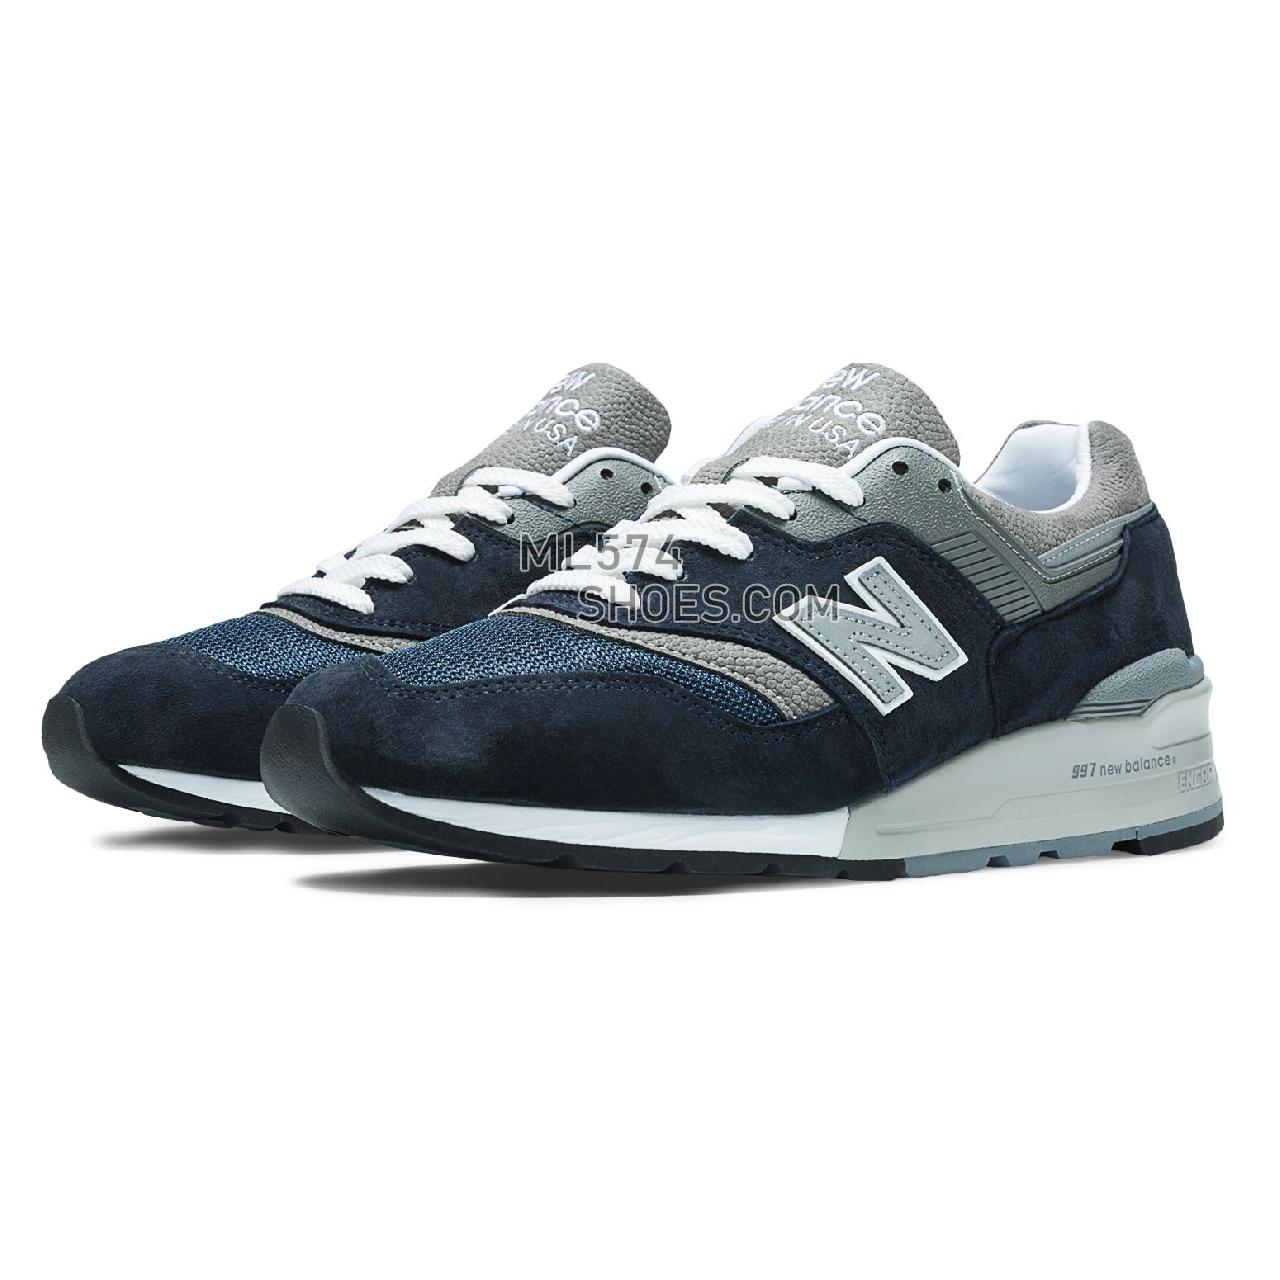 New Balance Made in US 997 - Men's 997 New Balance - Casual - Navy with Grey - M997NV